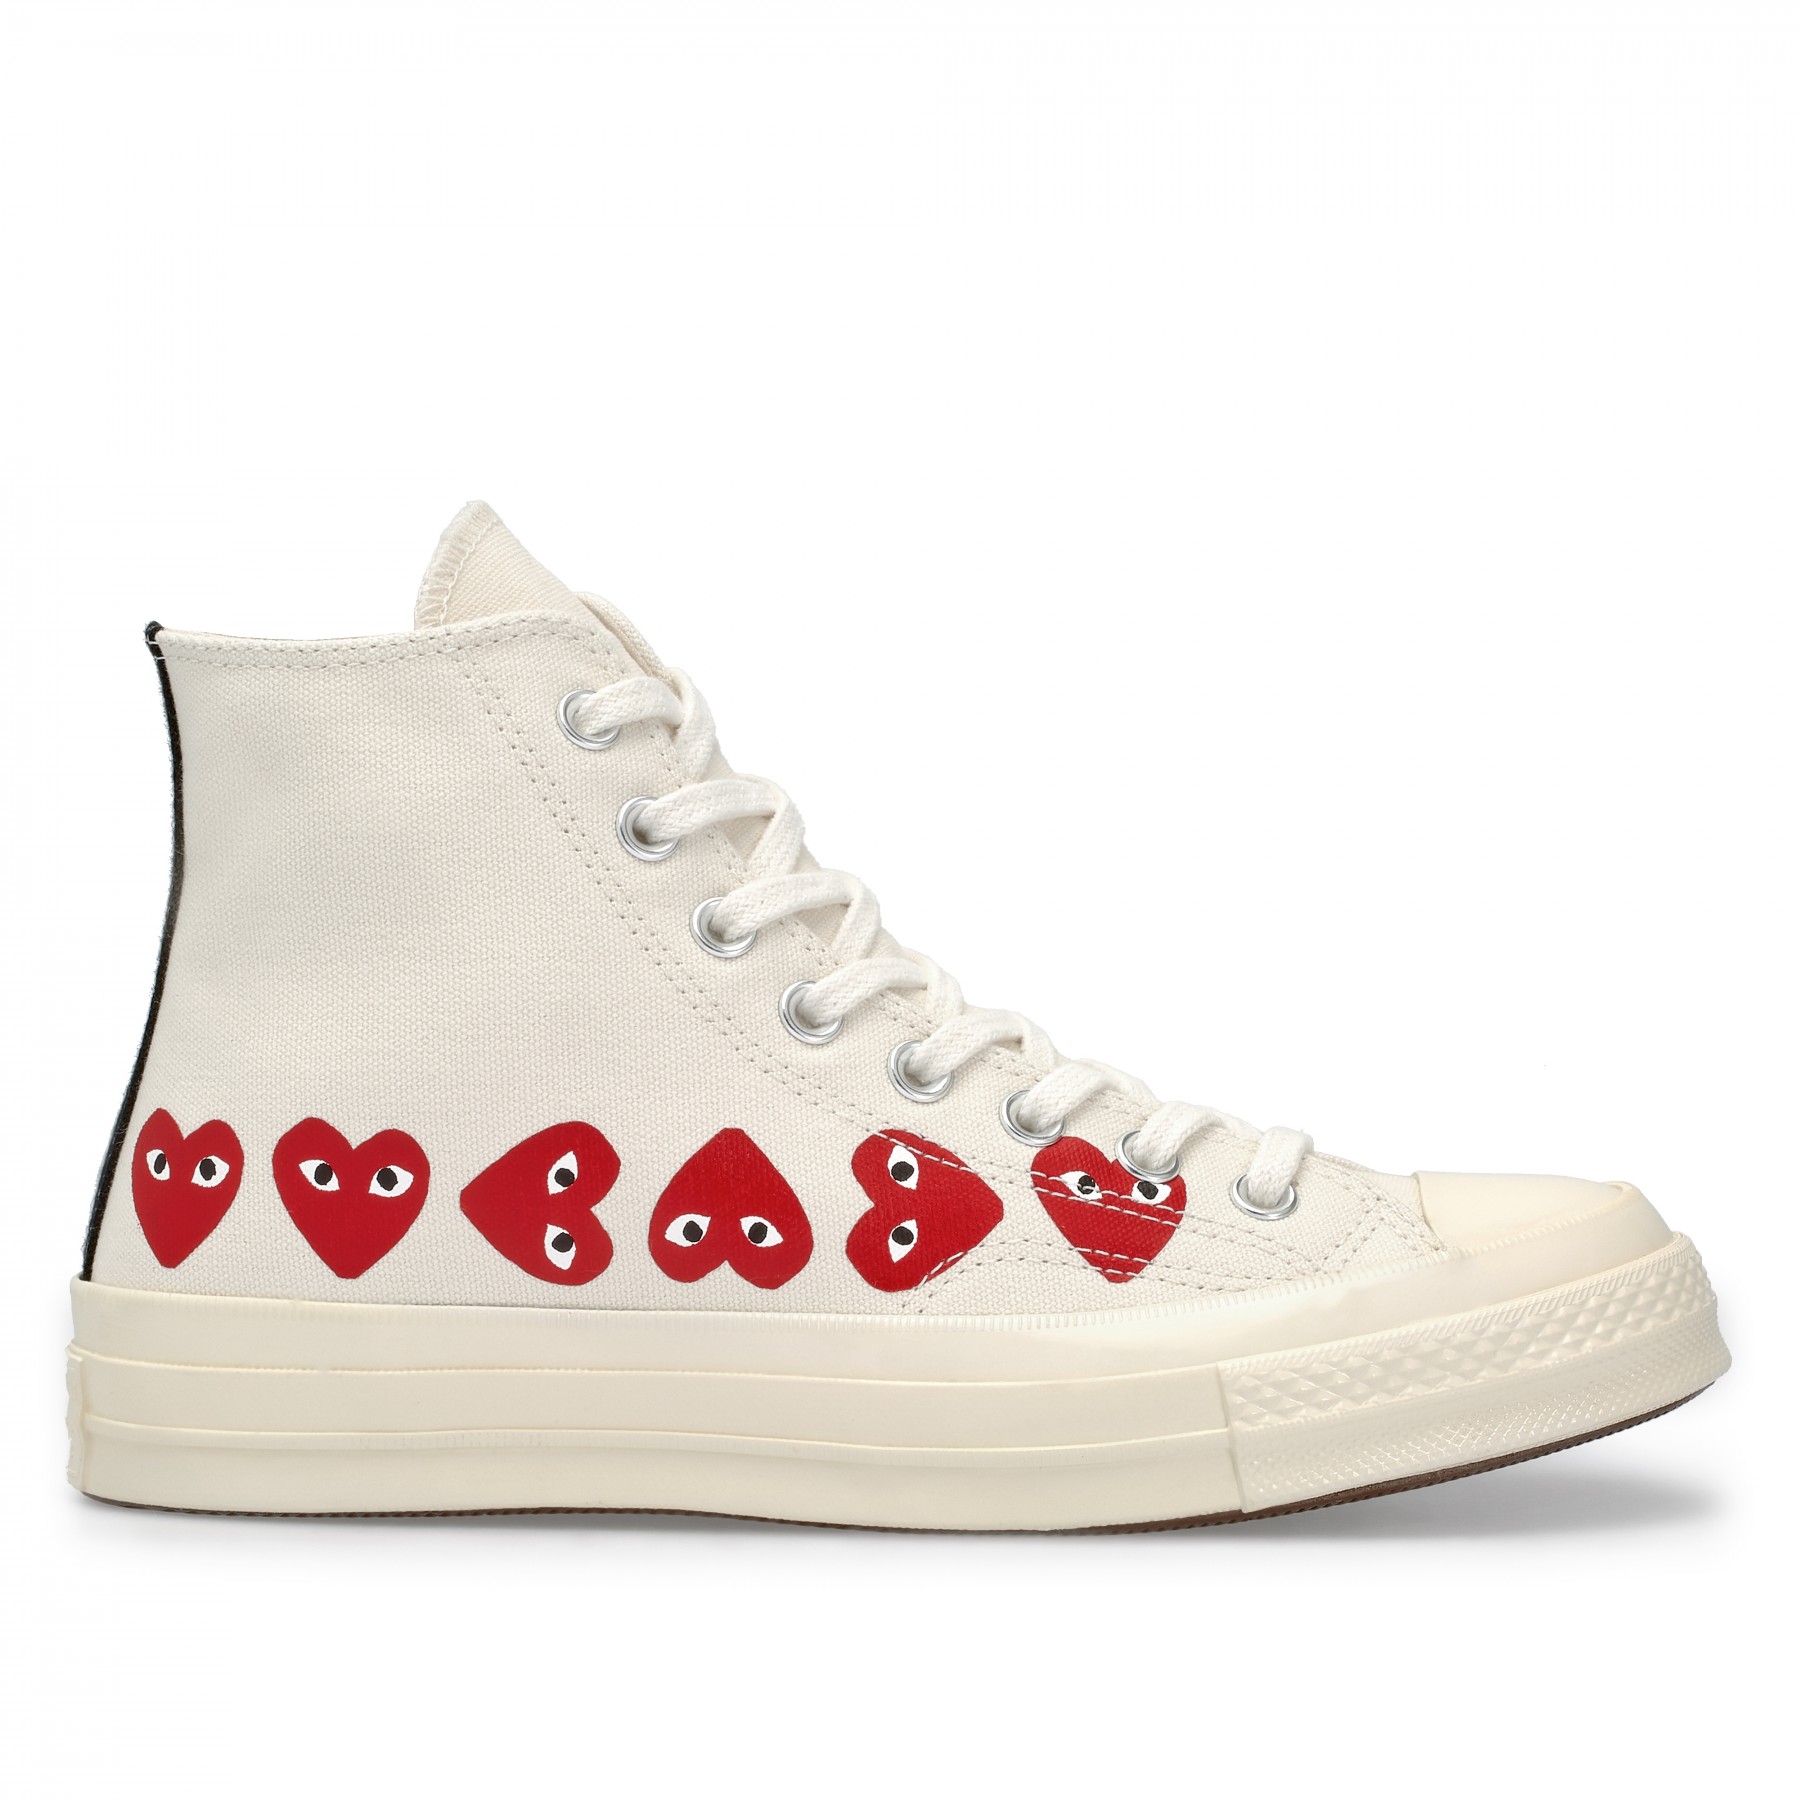 Trouva: X Converse Multi Red Heart Chuck Taylor All Star 70 High White Shoes